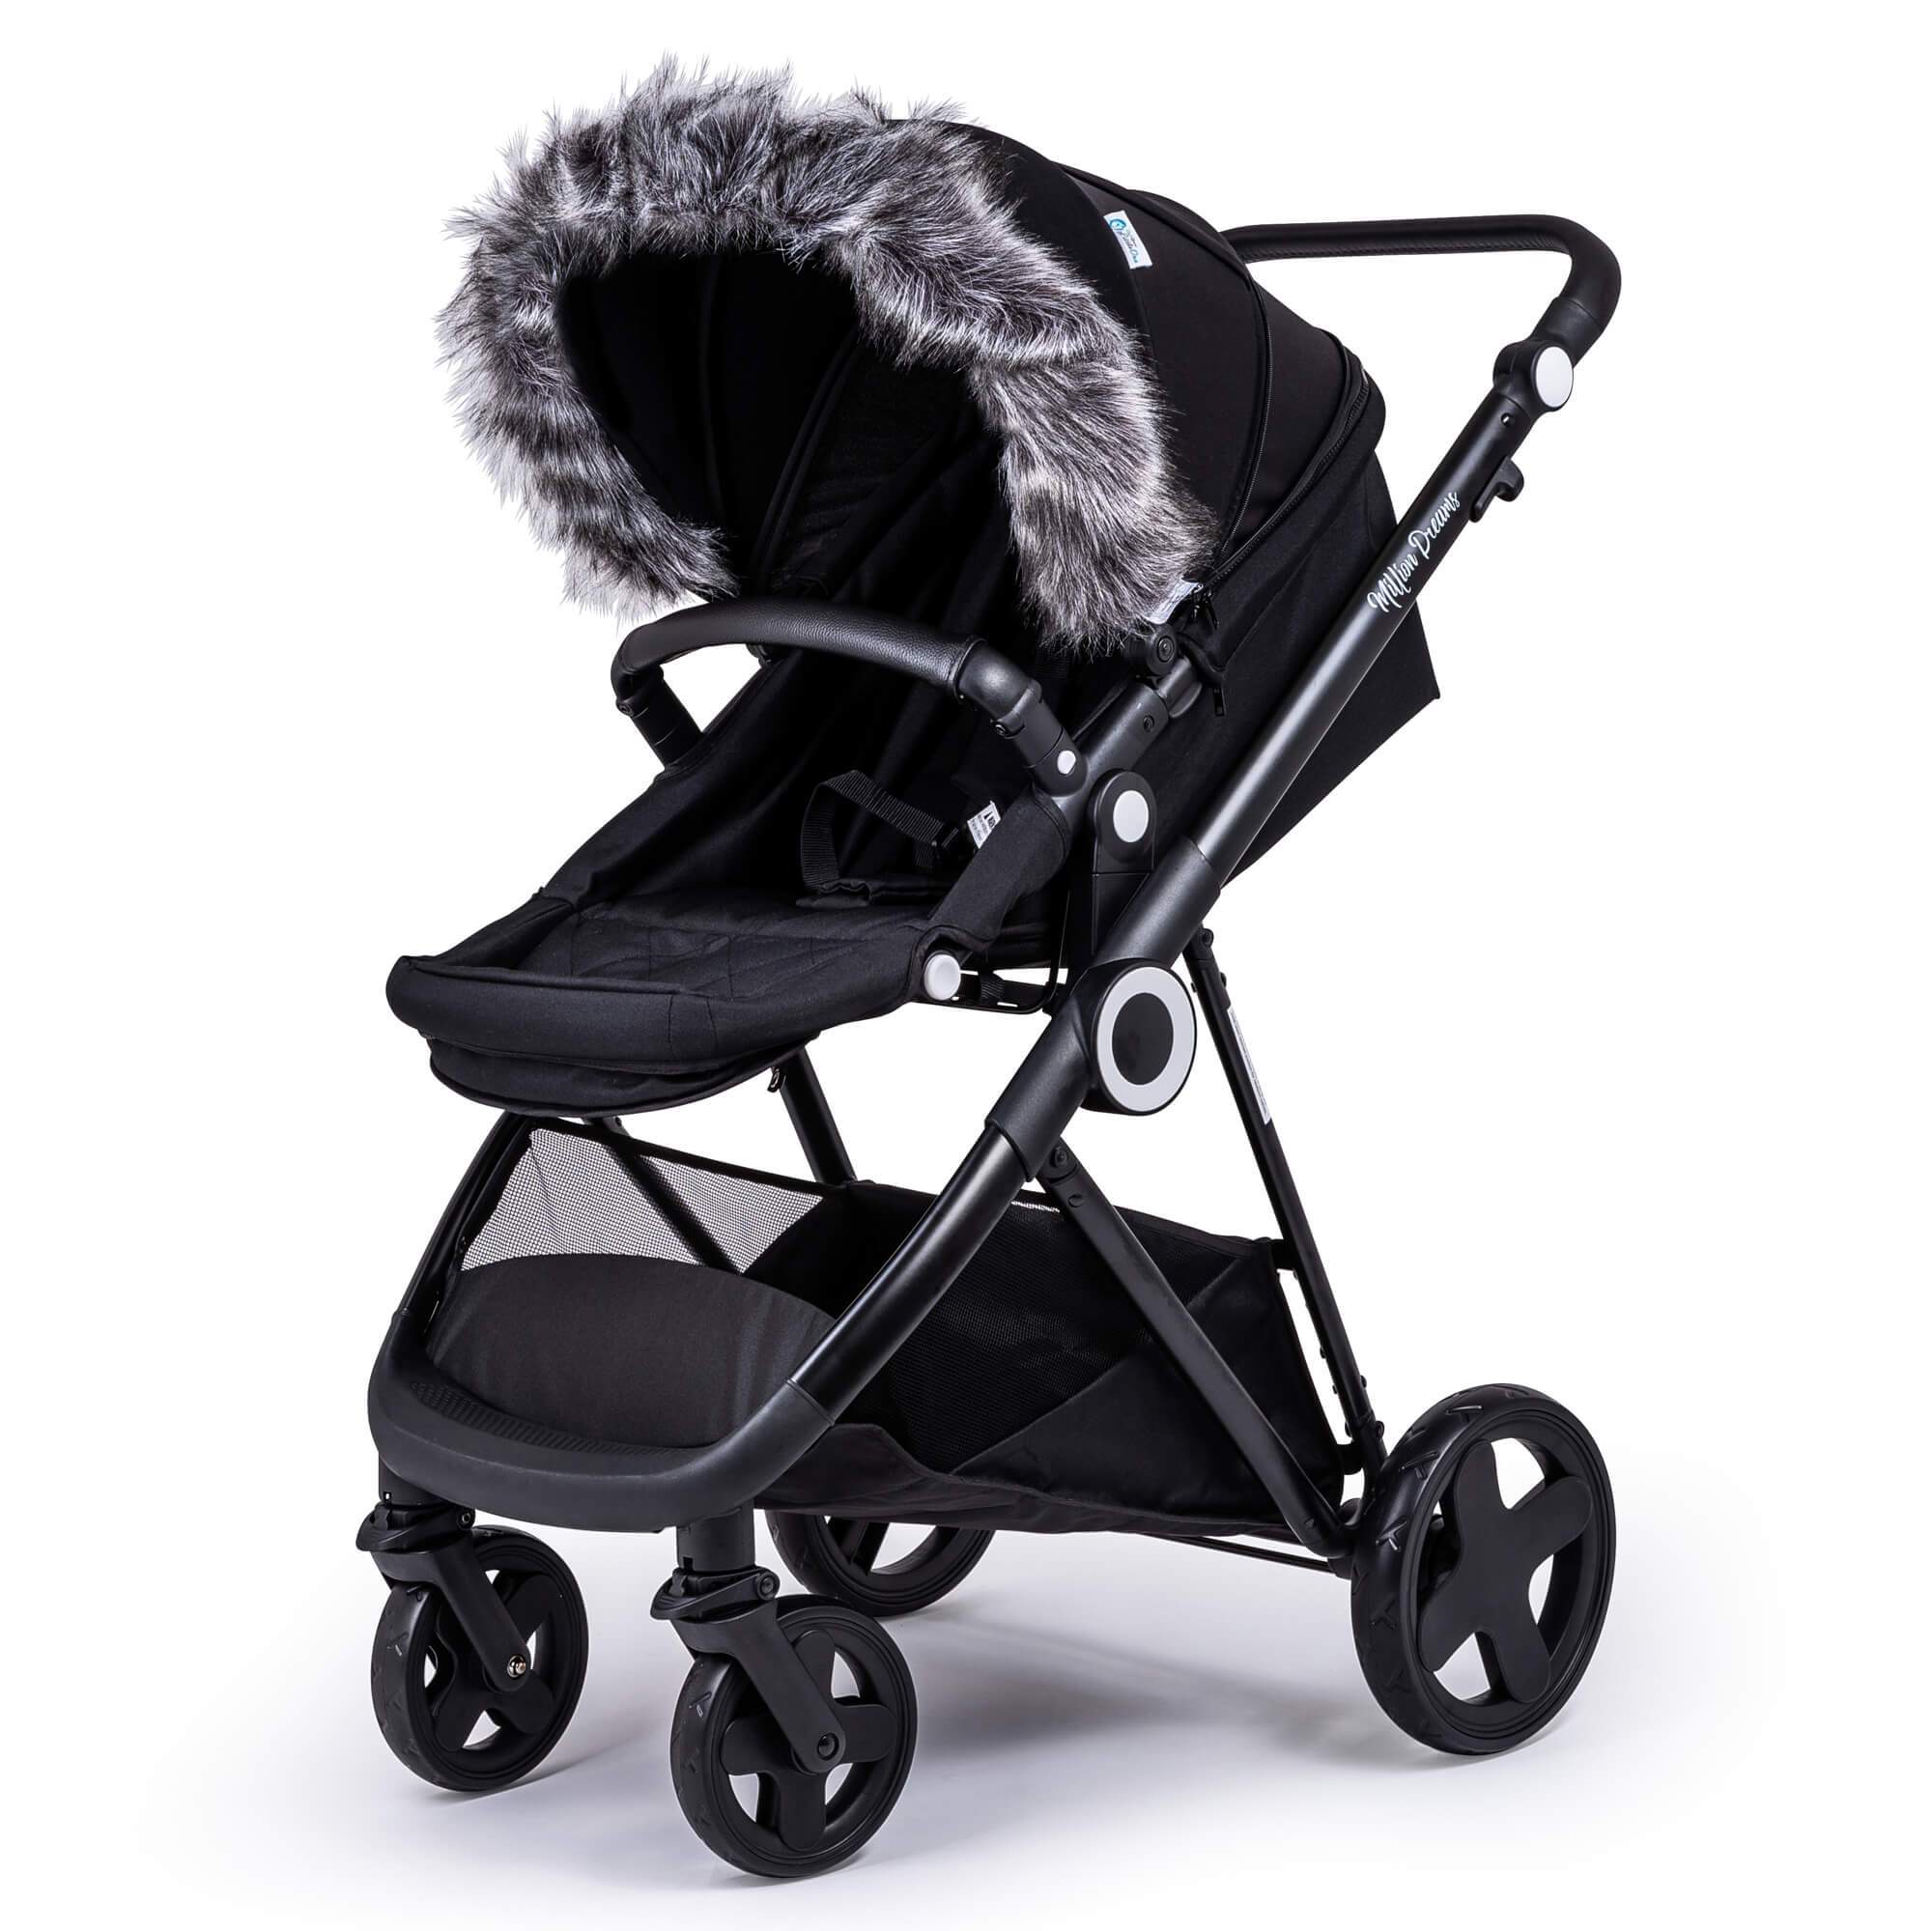 Pram Fur Hood Trim Attachment for Pushchair Compatible with Baby Trend - Dark Grey / Fits All Models | For Your Little One